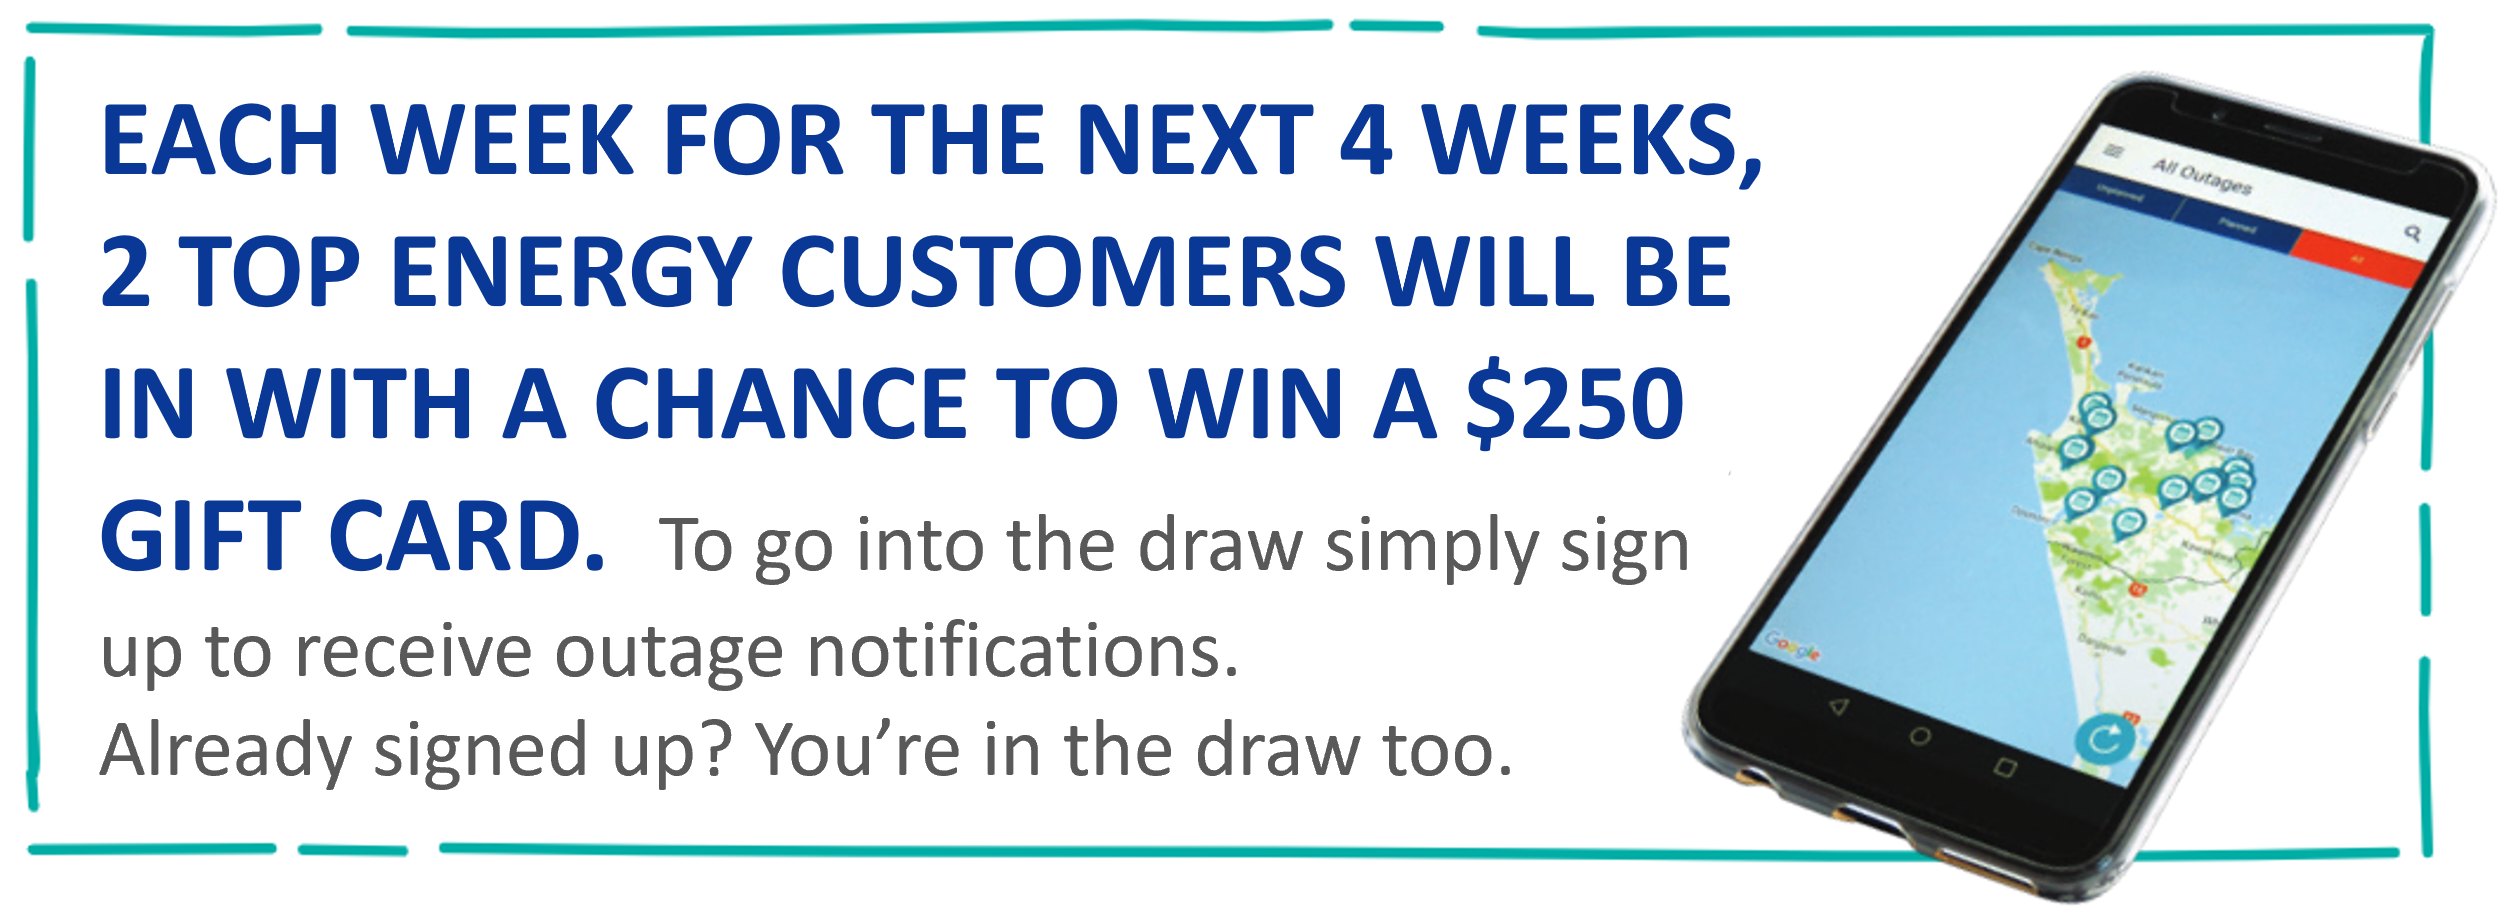 Sign up and win image